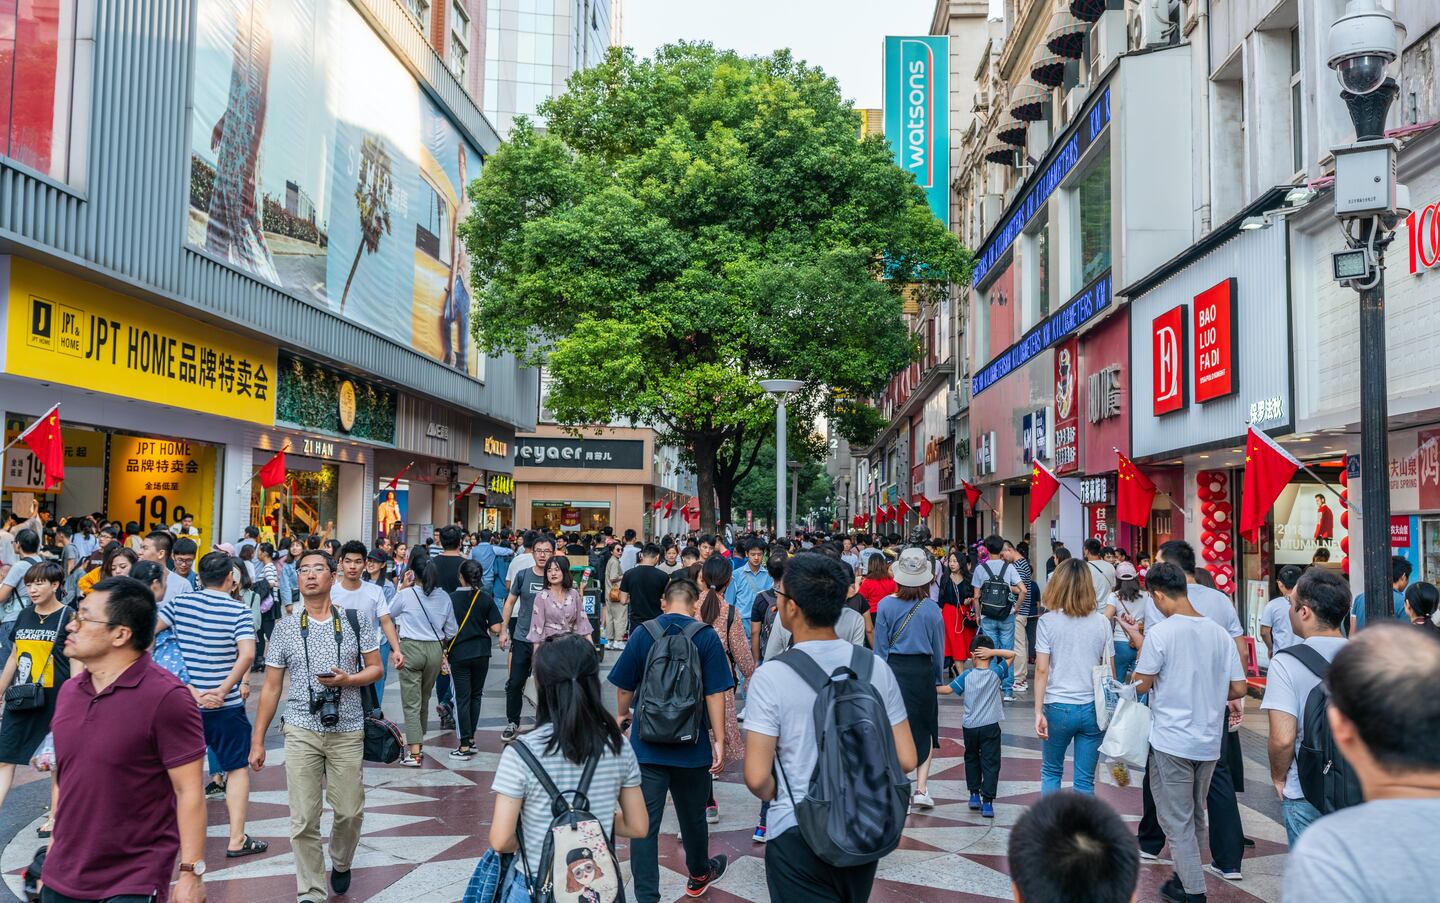 A shopping street in Wuhan, China during Golden Week in 2019.